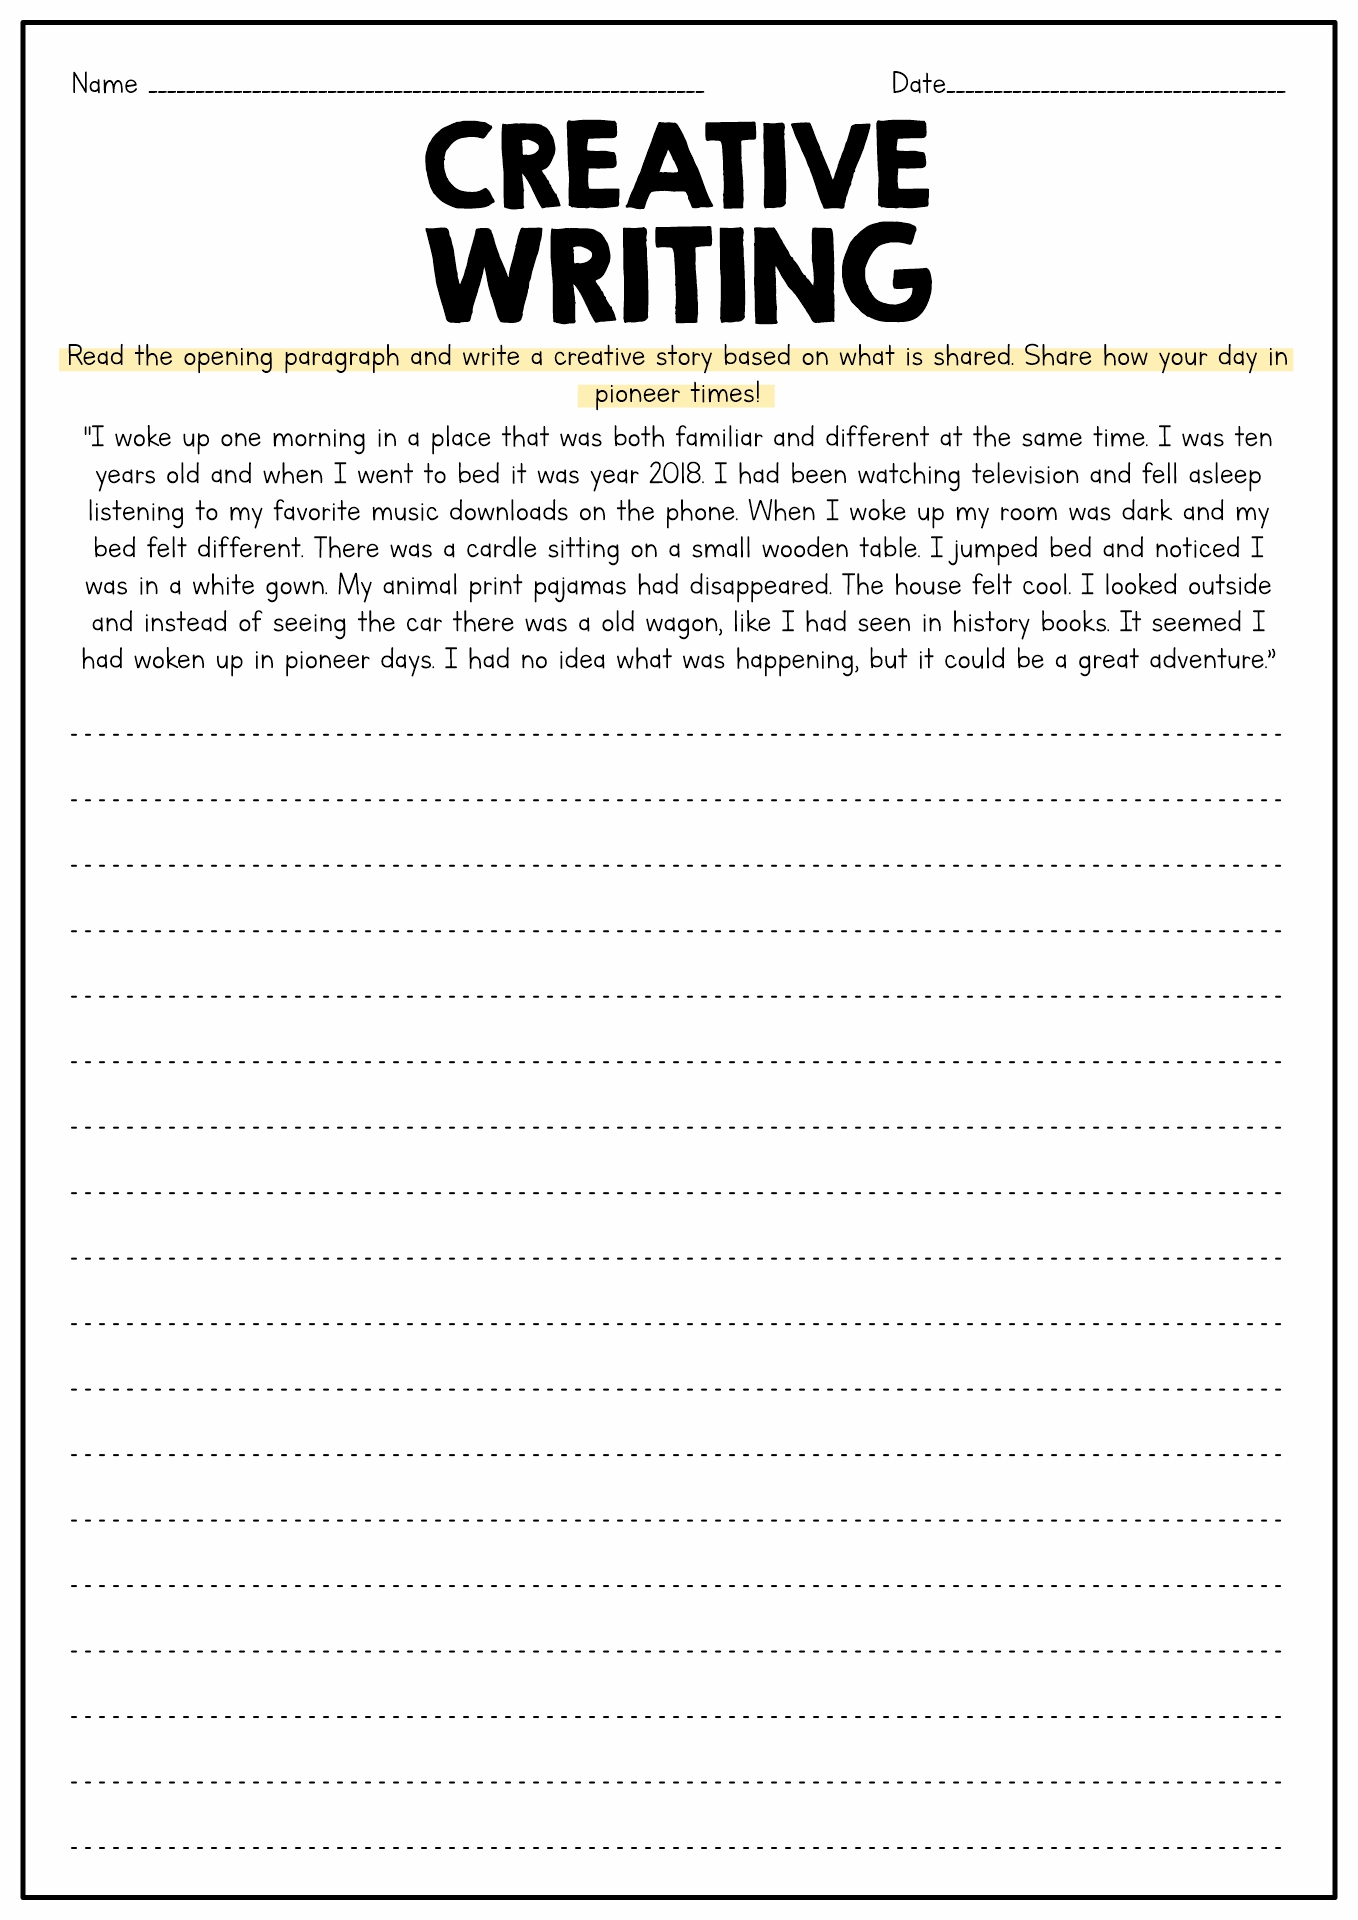 14 Best Images of Worksheets 4th Grade Narrative Writing ...